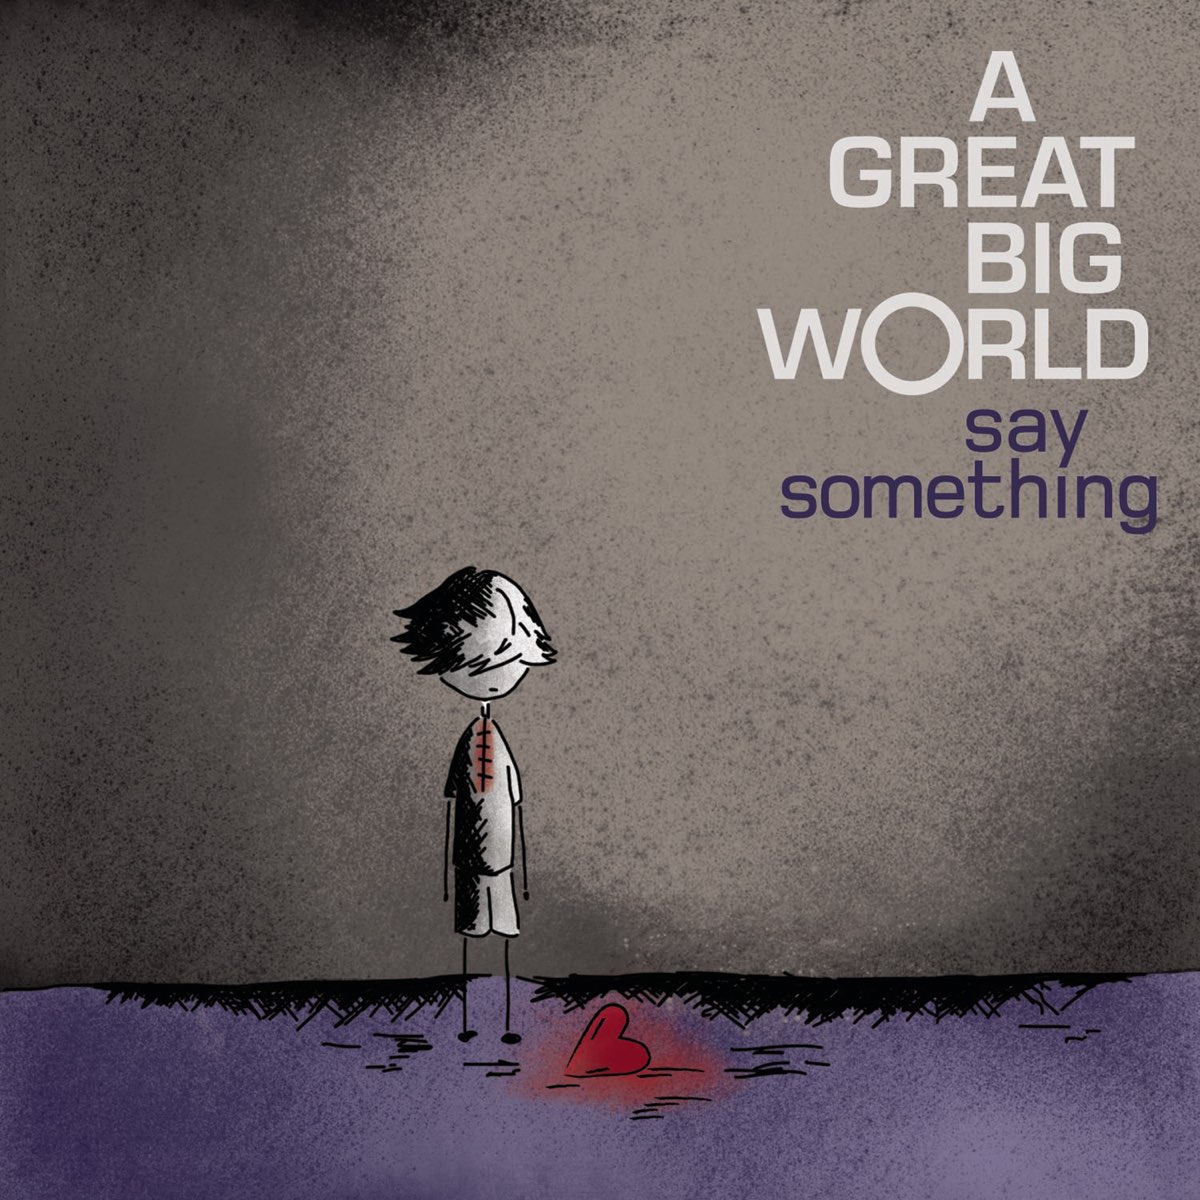 Say something words. Say something a great big World. A great big World Christina Aguilera. Say something i'm giving.